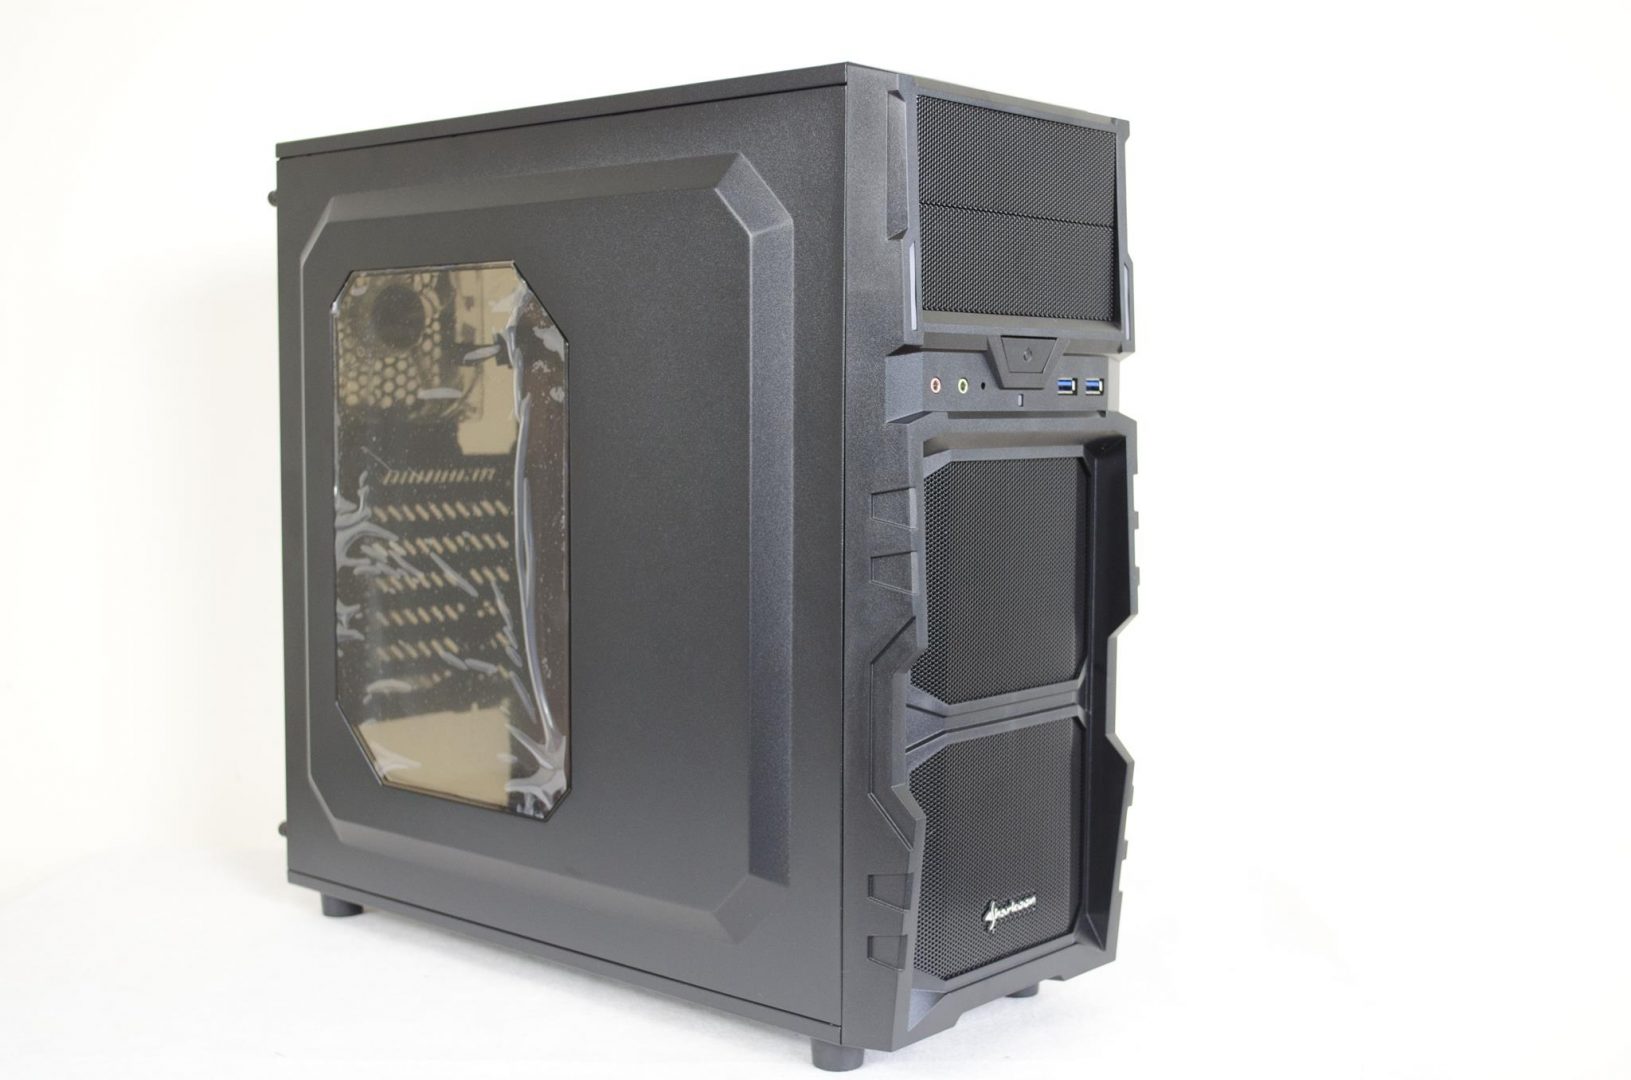 Sharkoon VG5-W PC Case Review